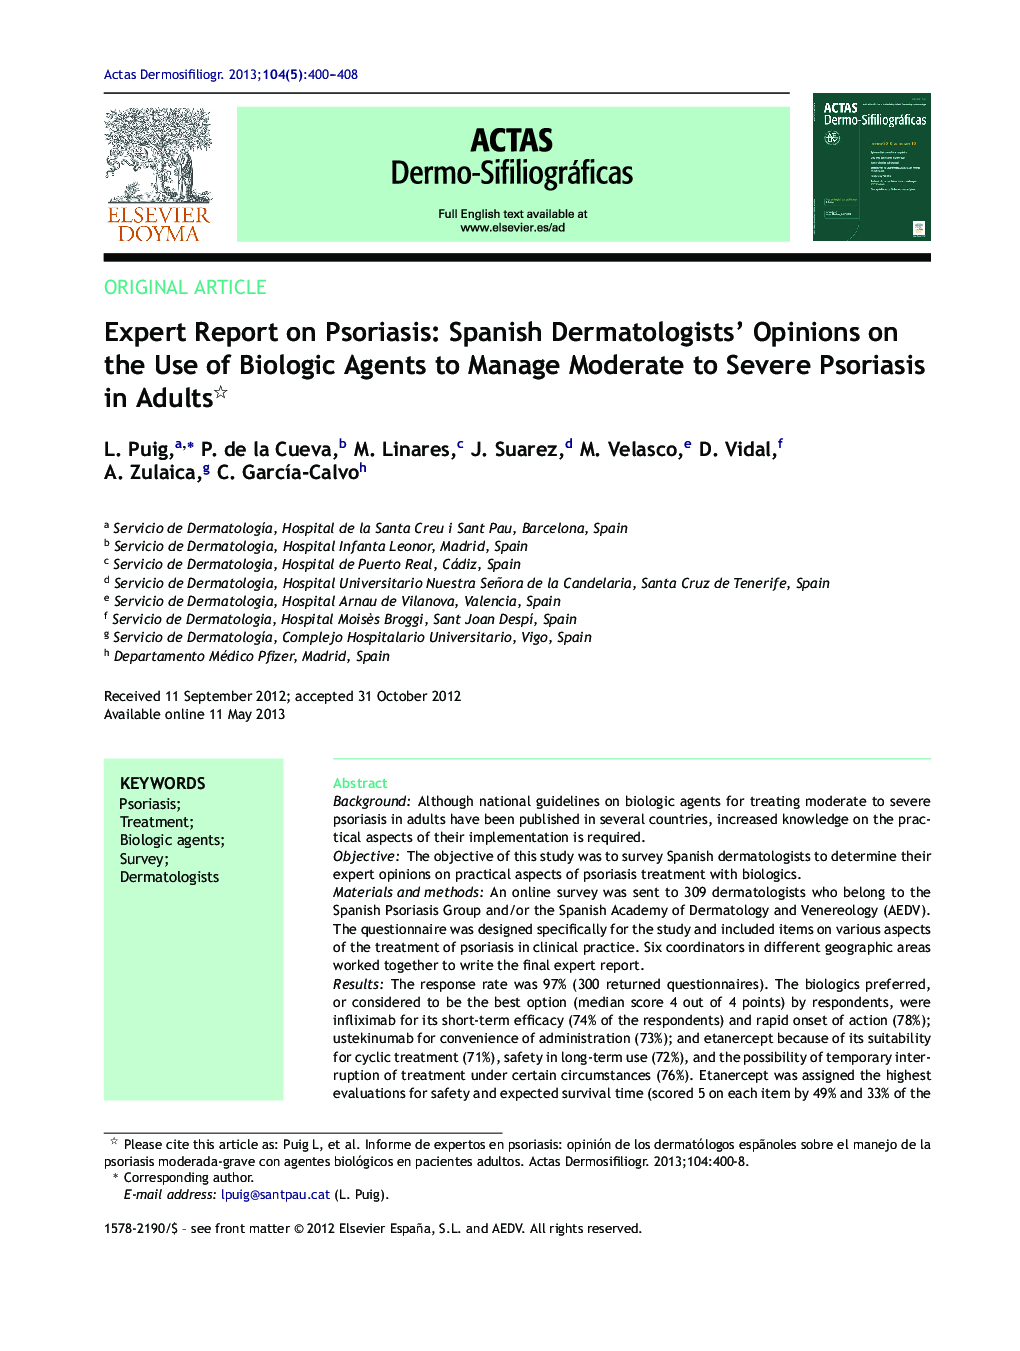 Expert Report on Psoriasis: Spanish Dermatologists’ Opinions on the Use of Biologic Agents to Manage Moderate to Severe Psoriasis in Adults 